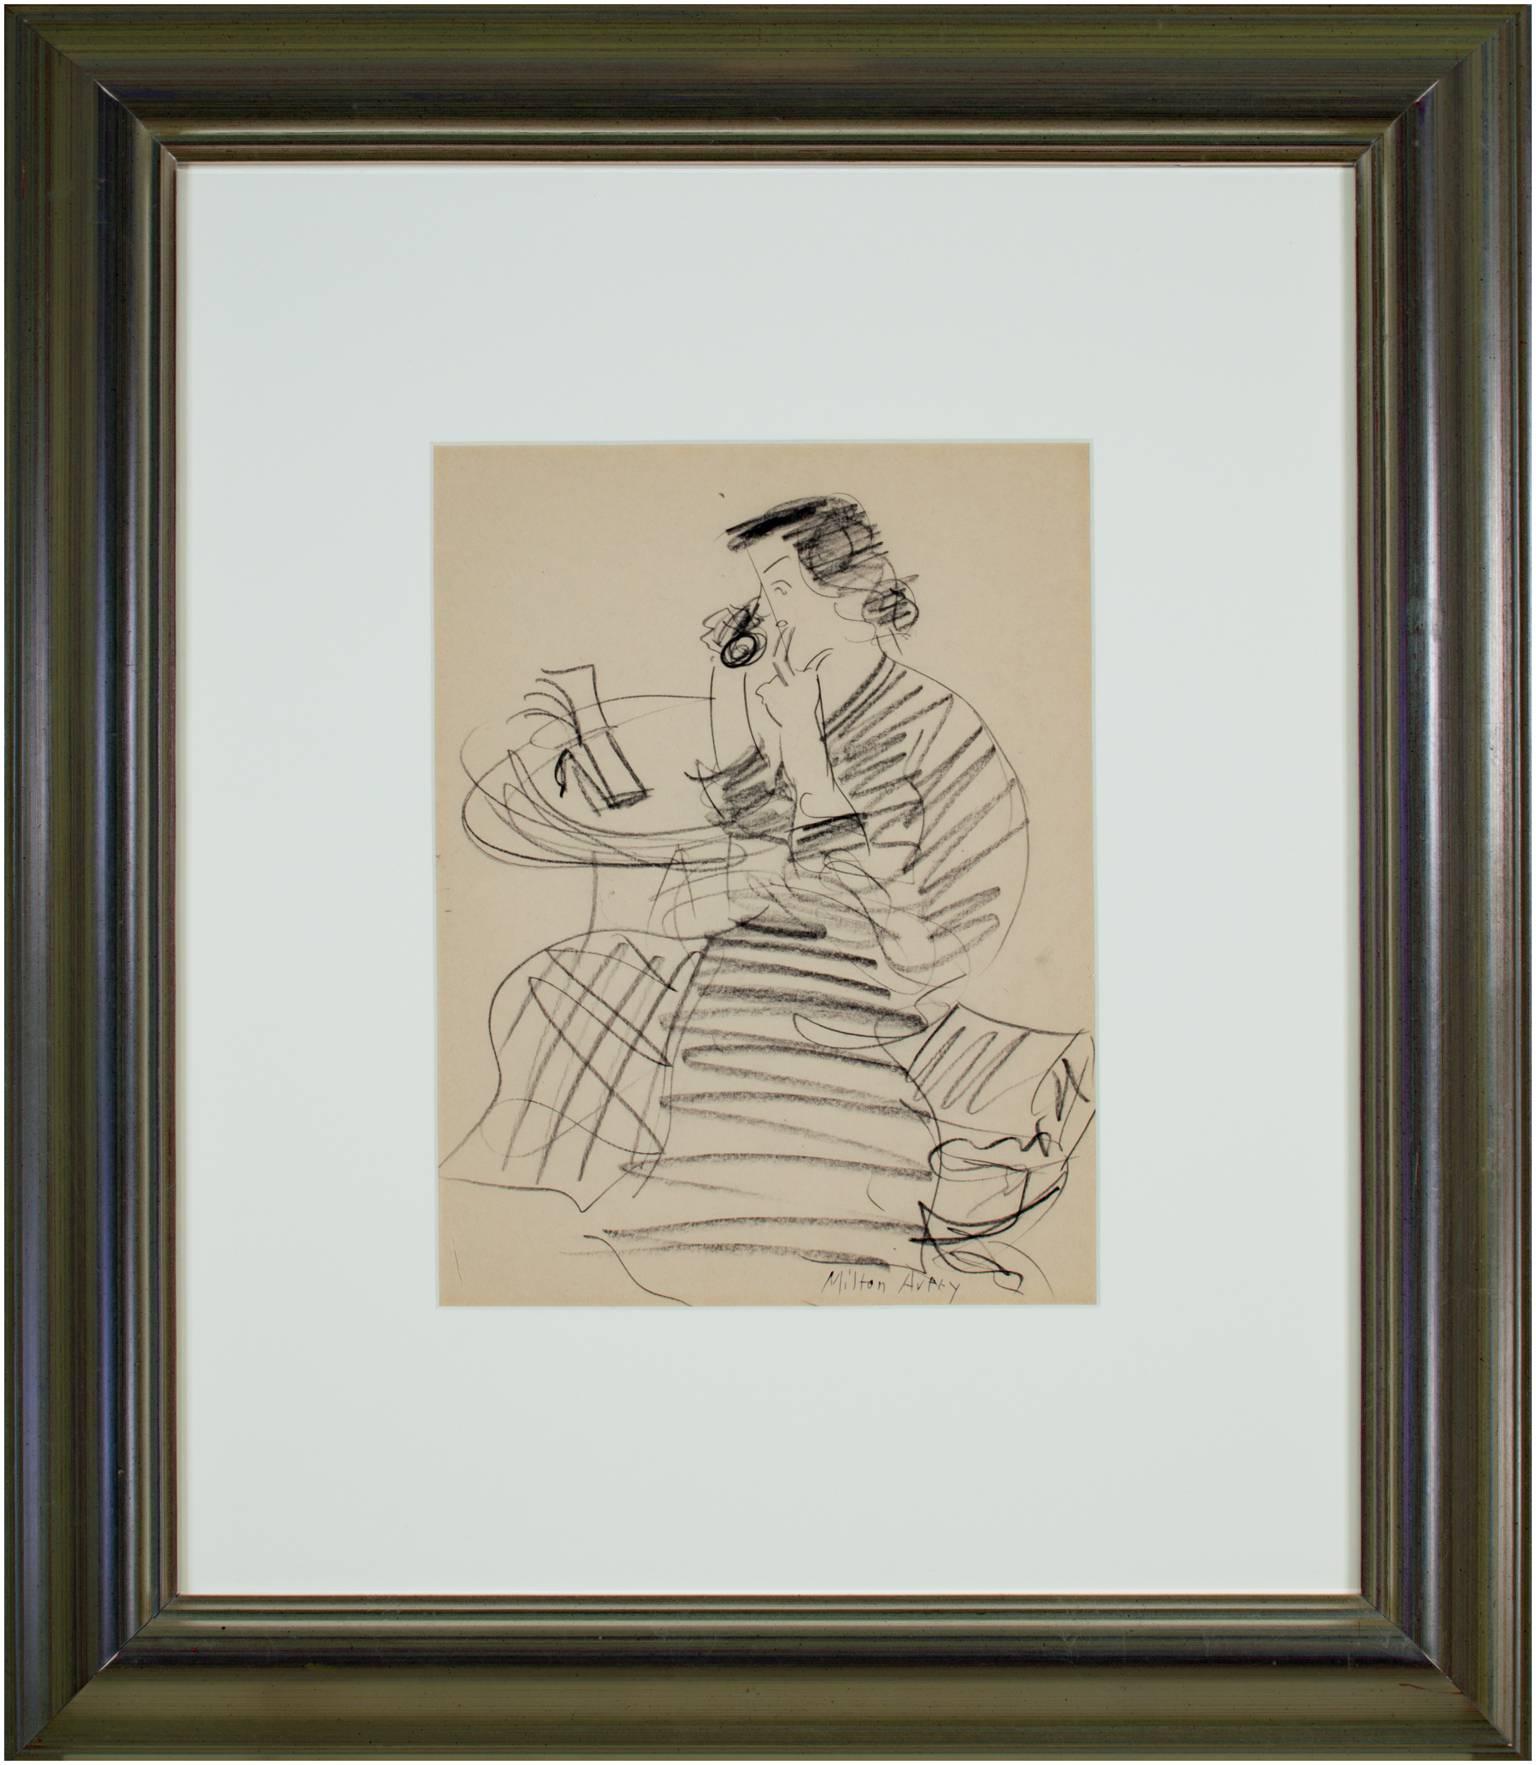 A pencil on paper figurative drawing by American artist Milton Avery depicts his wife, Sally Avery, on the telephone. The table depicted in the drawing was in the front entrance to Sally Avery's apartment at 300 Central Park West in New York City.